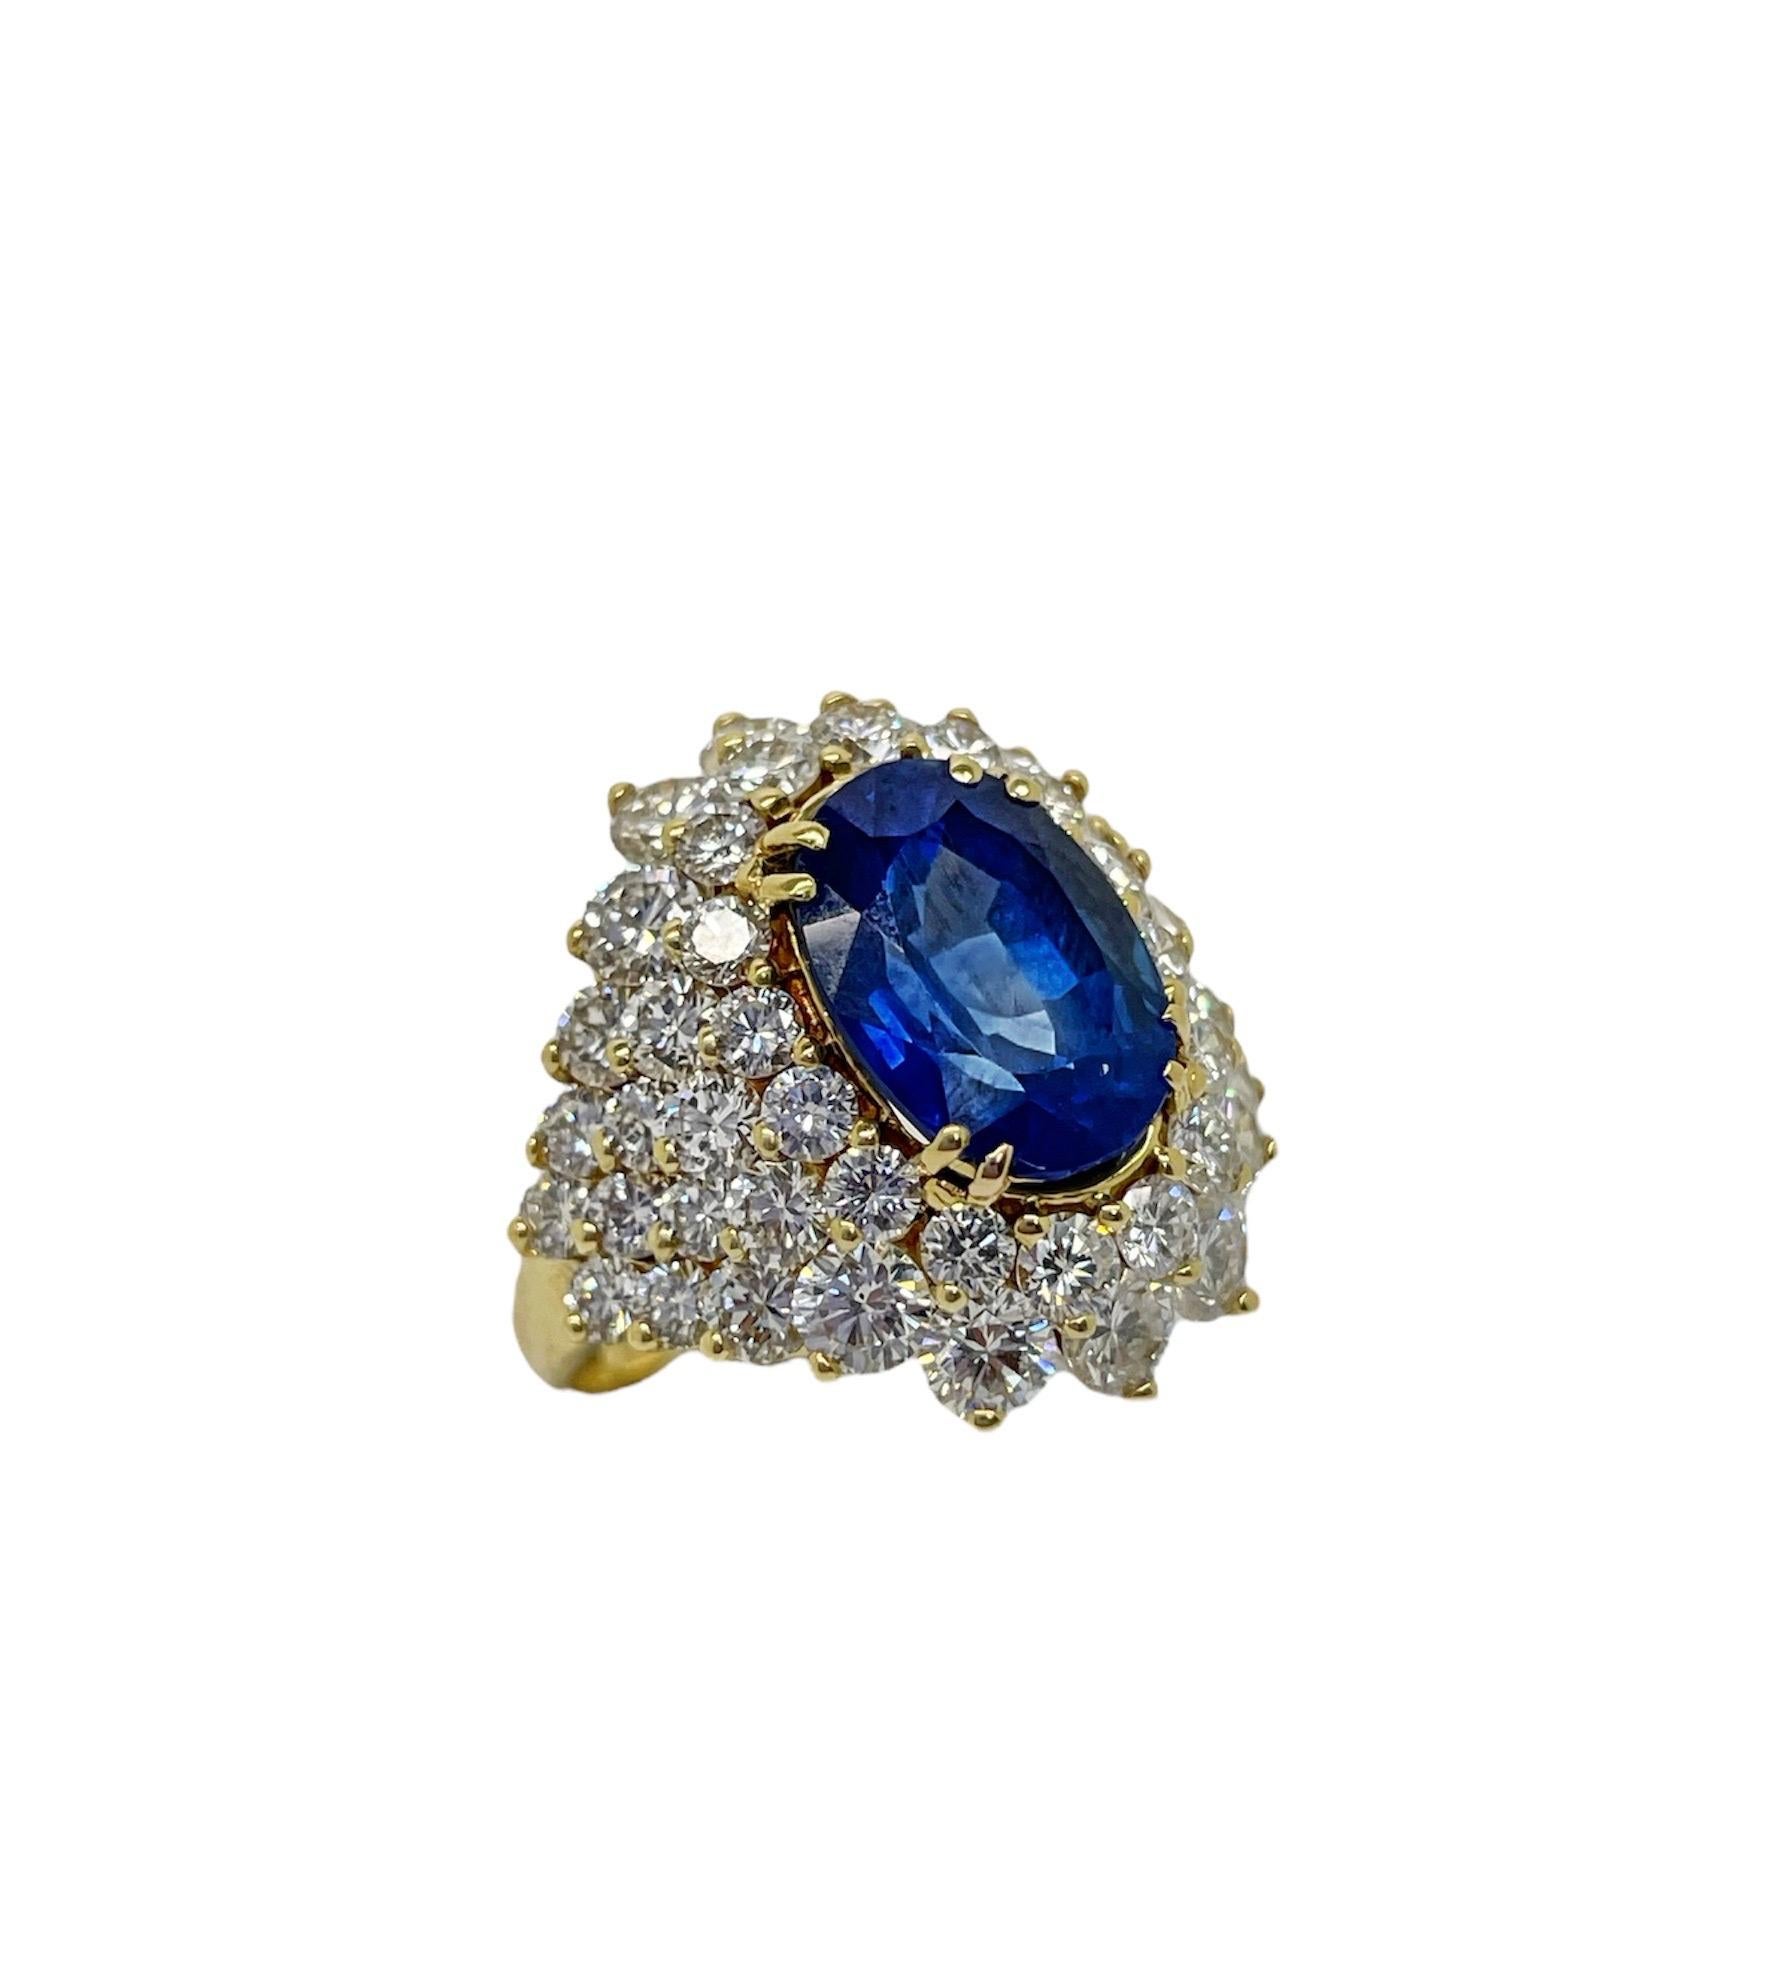 This stunning ring contains an oval mixed cut Ceylon sapphire weighing 5.82 carats surrounded by 50 top quality round brilliant cut diamonds weighing approximately 4.50 carats total. Mounted in a beautifully made 18 karat gold mounting.

Ring size 6